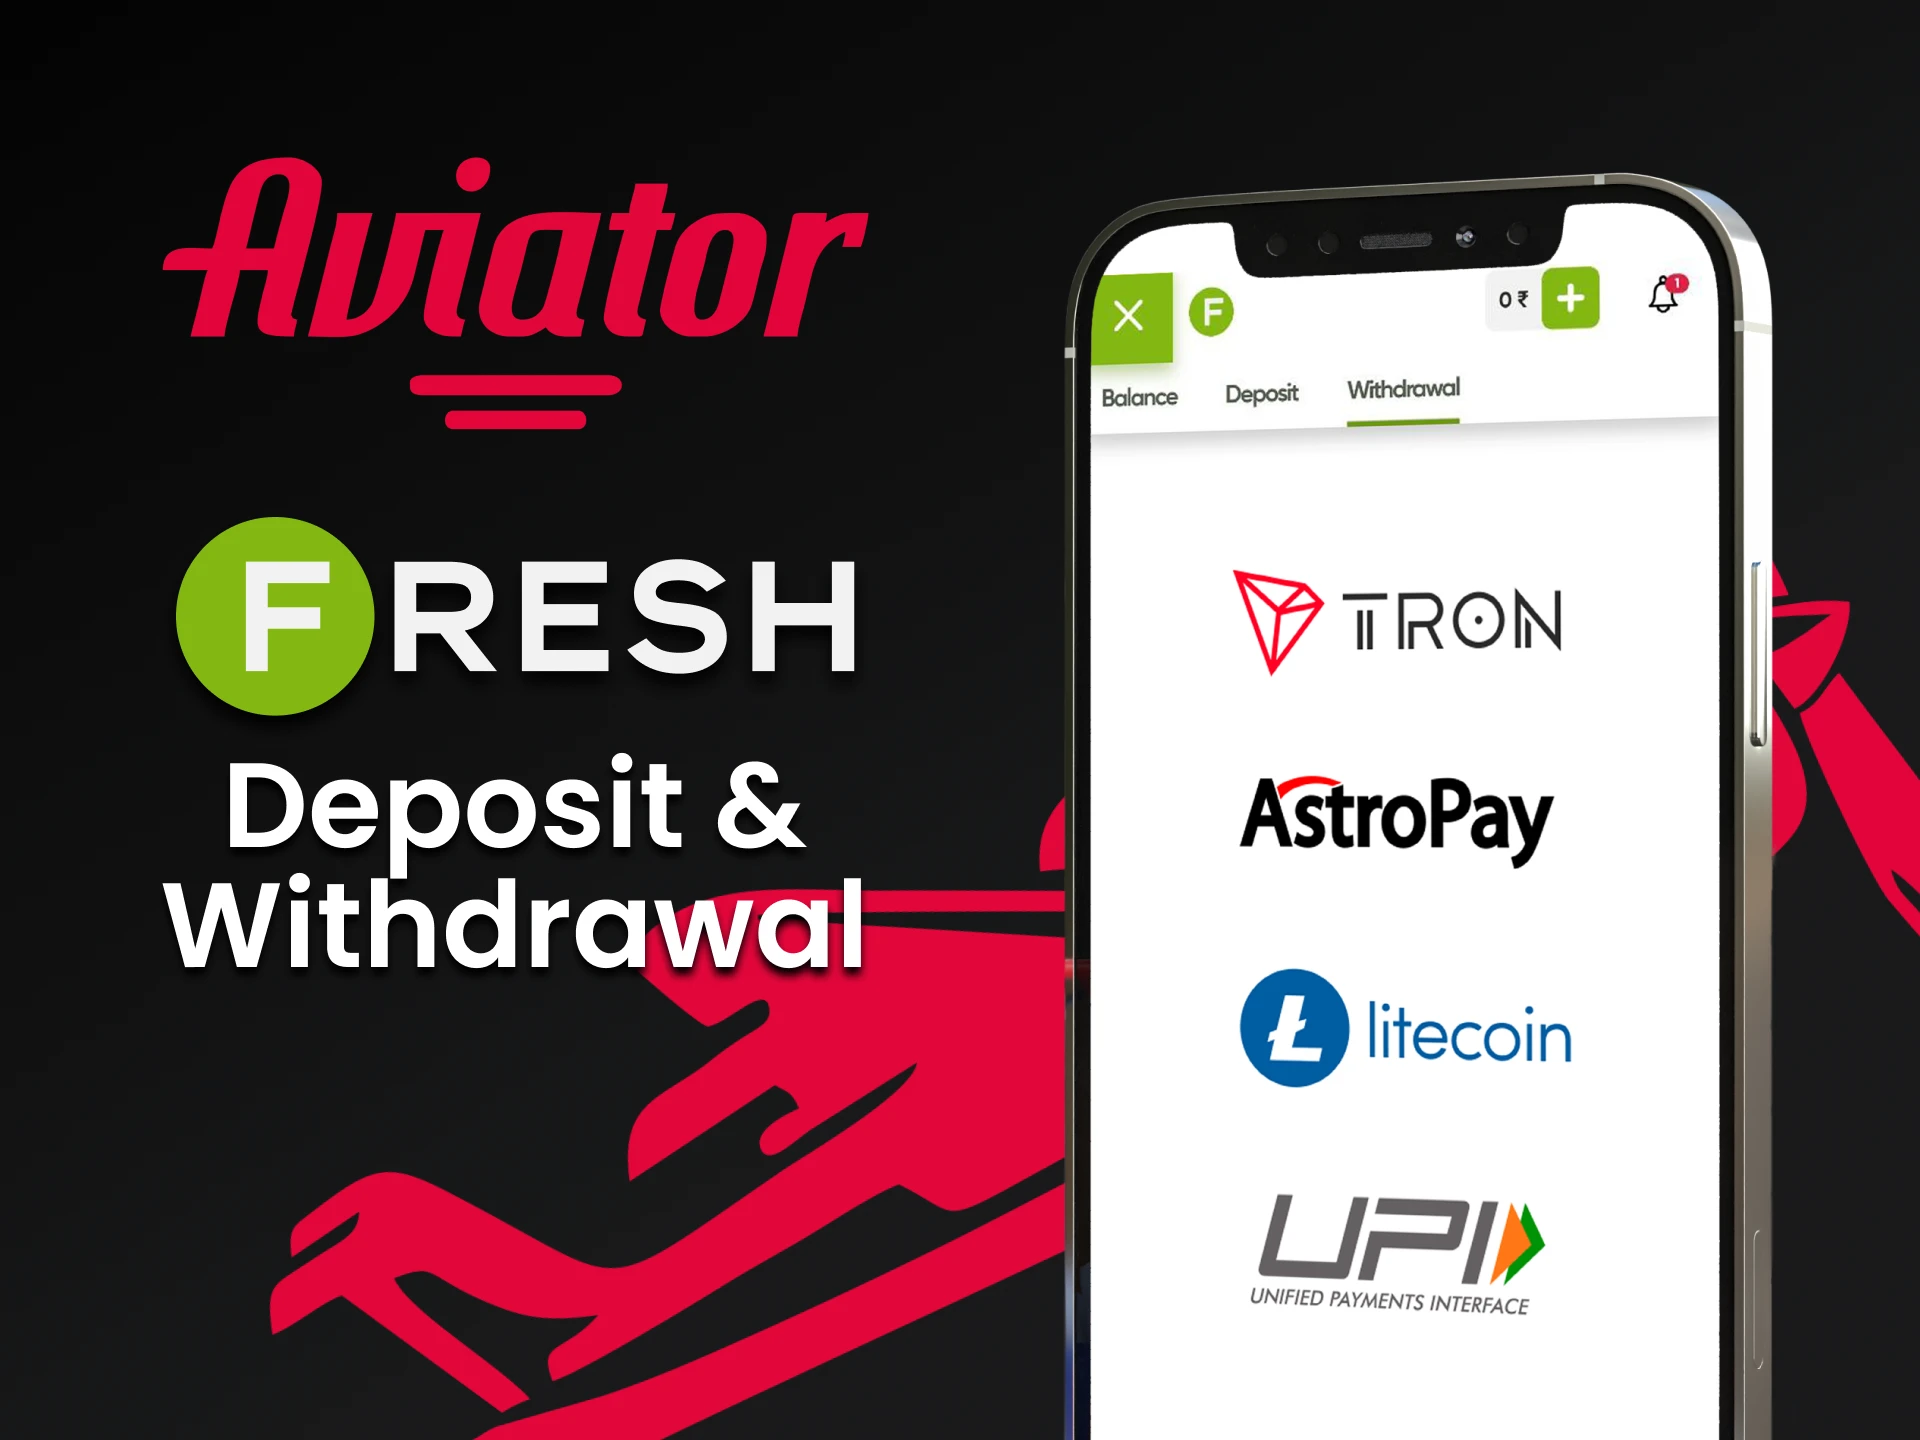 We will tell you about the transaction methods for the Aviator game in the Fresh Casino app.